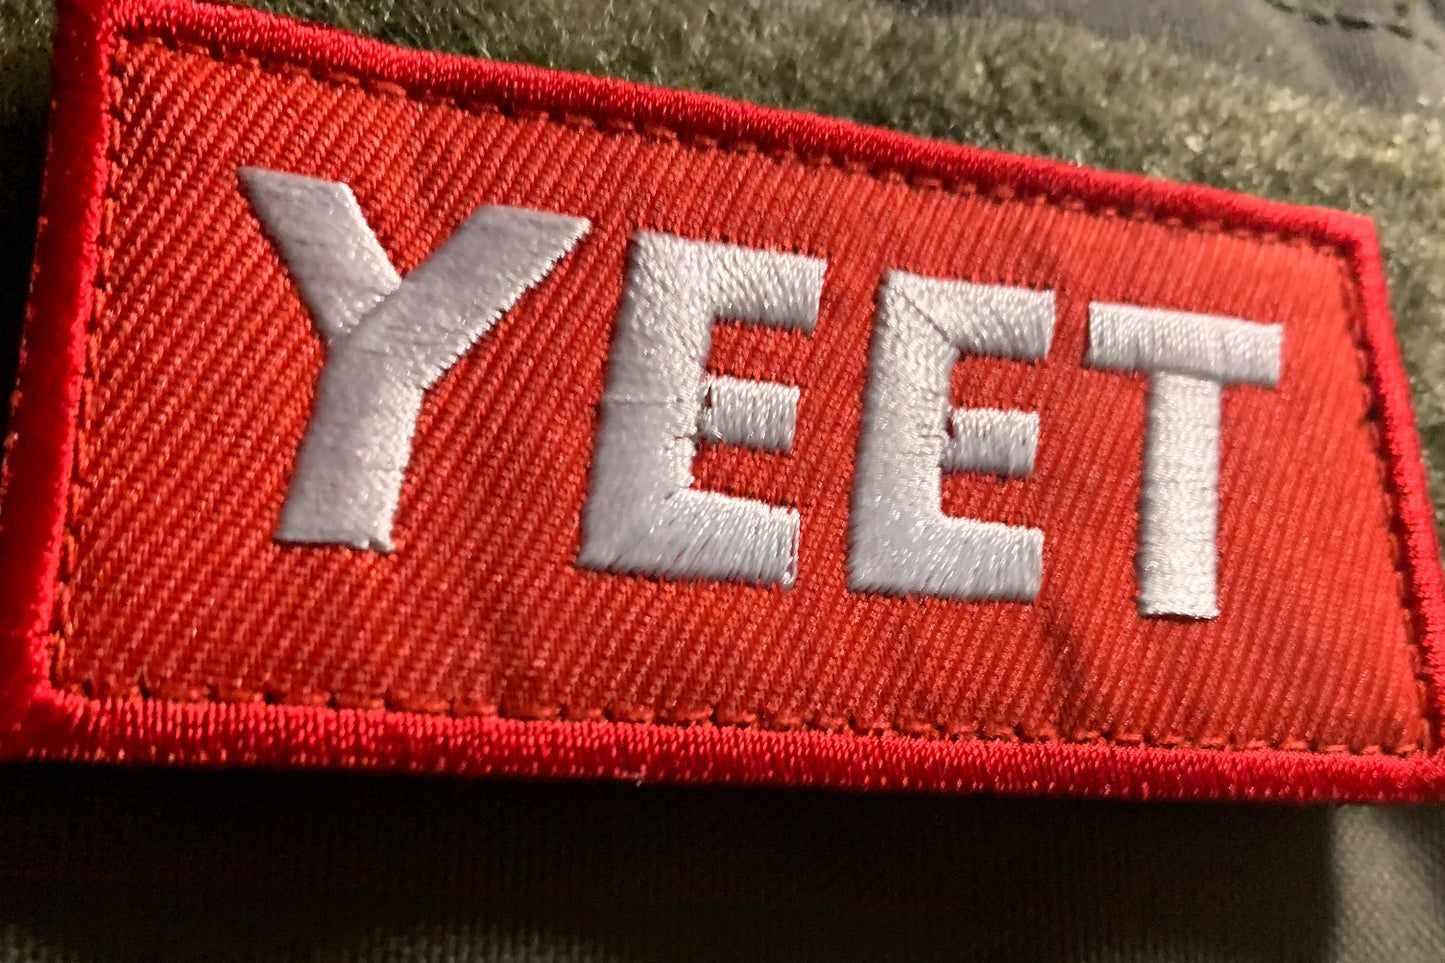 Airsofter Operator Yeet Send It Airsoft Meme Patch